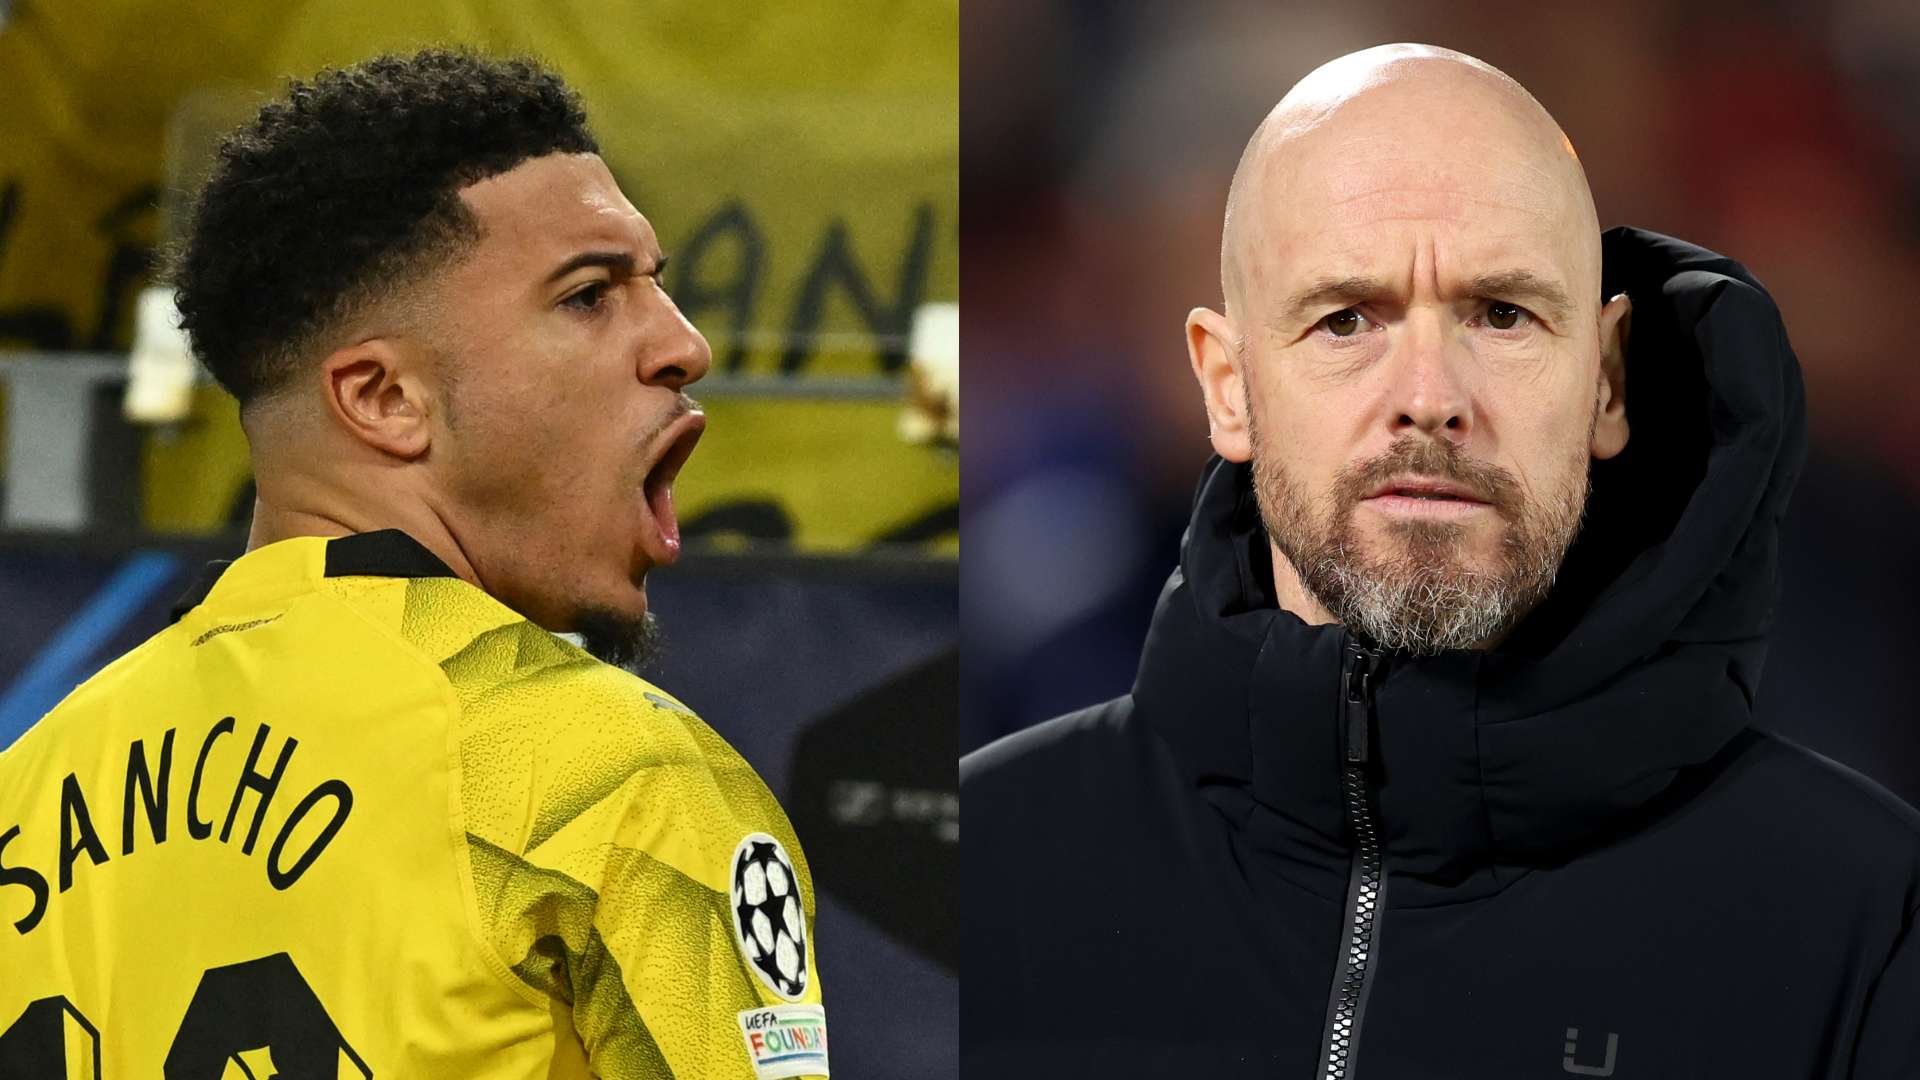 Jadon Sancho told he's 'won' battle with Erik ten Hag after dealing Man Utd major Champions League blow in Borussia Dortmund colours as fans react to damning statistic that shows how far